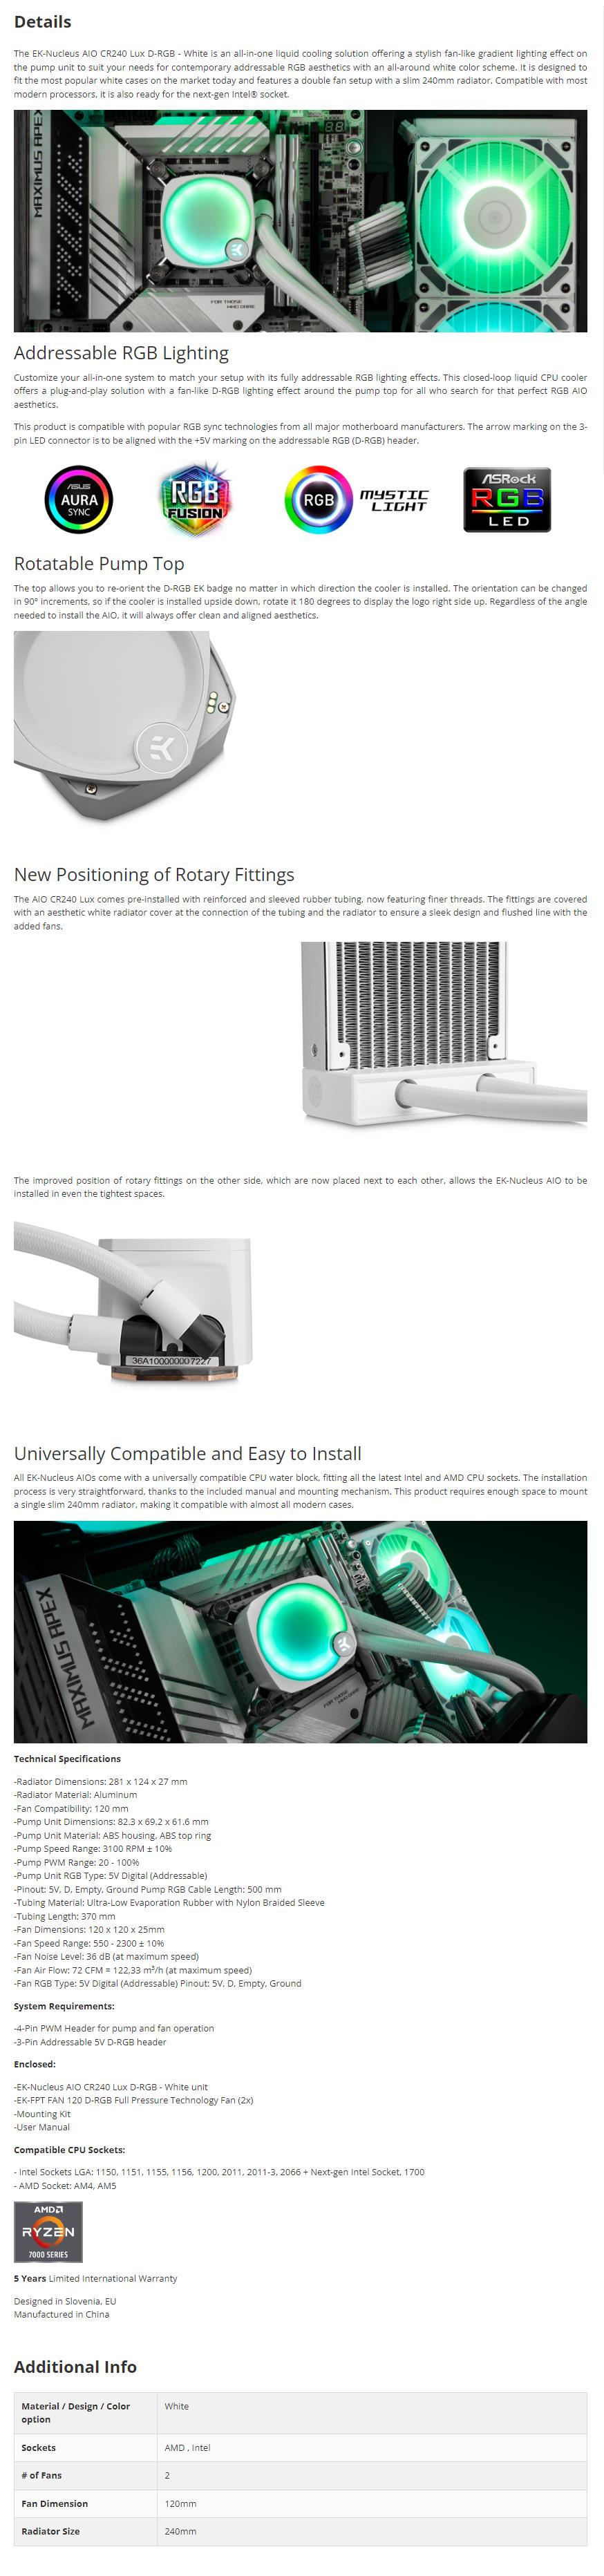 A large marketing image providing additional information about the product EK Nucleus 240mm Lux D-RGB AIO Liquid CPU Cooler - White - Additional alt info not provided